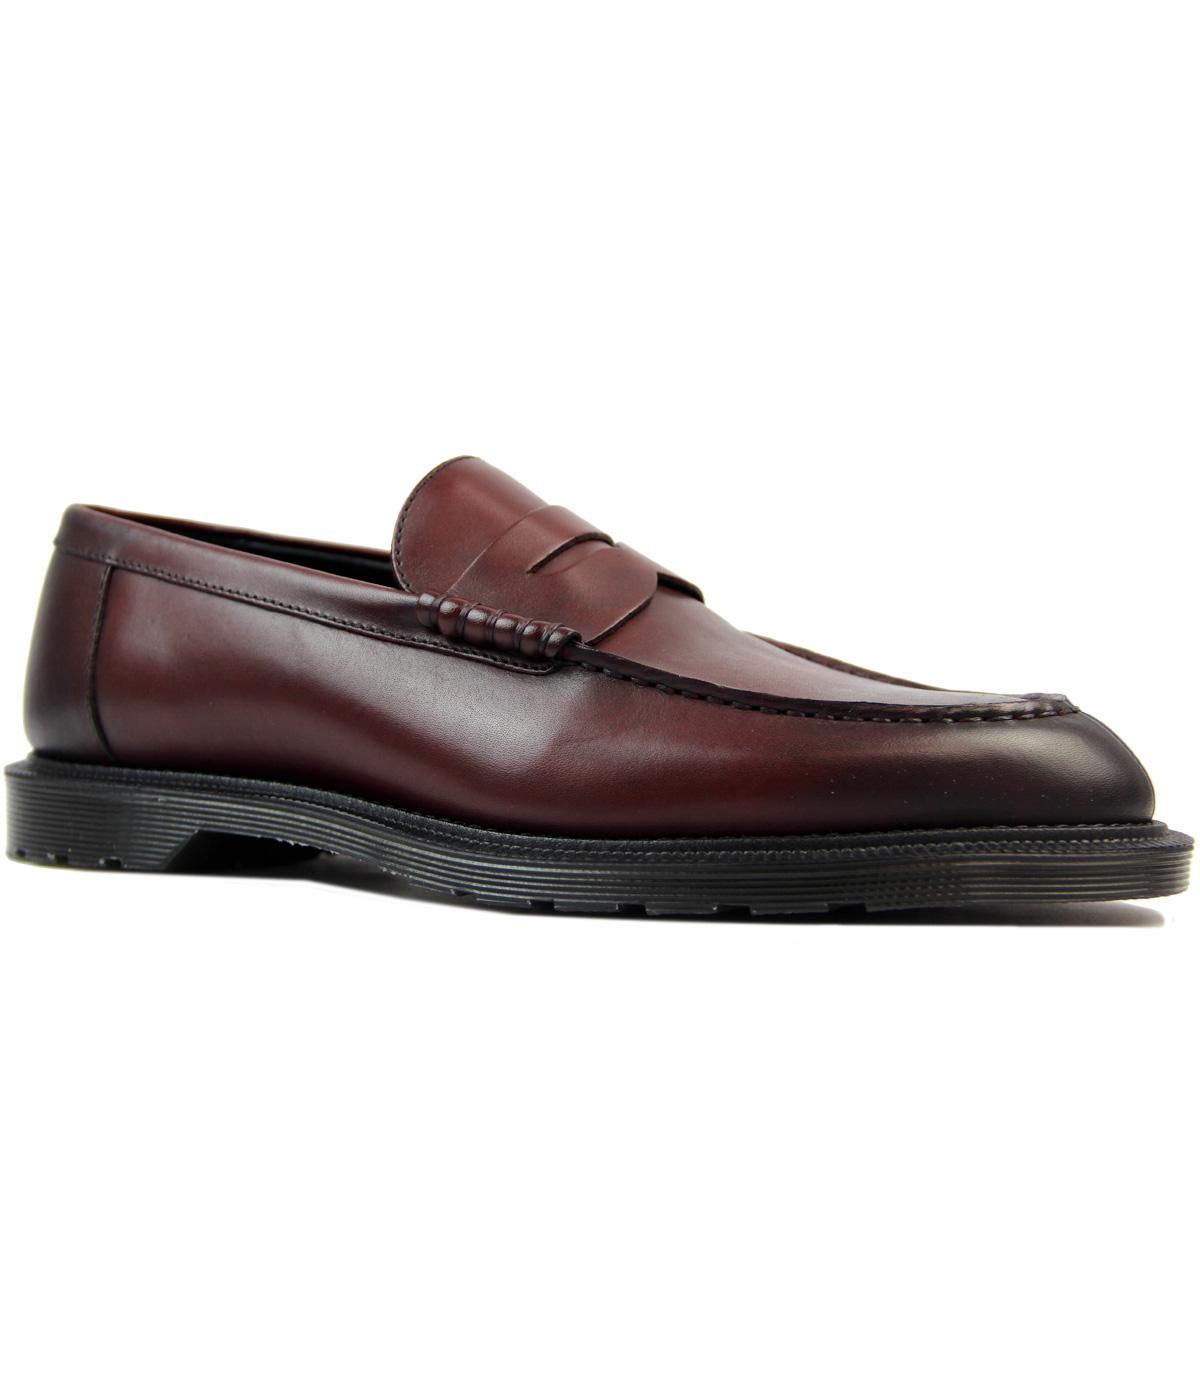 dr martens penton penny loafers